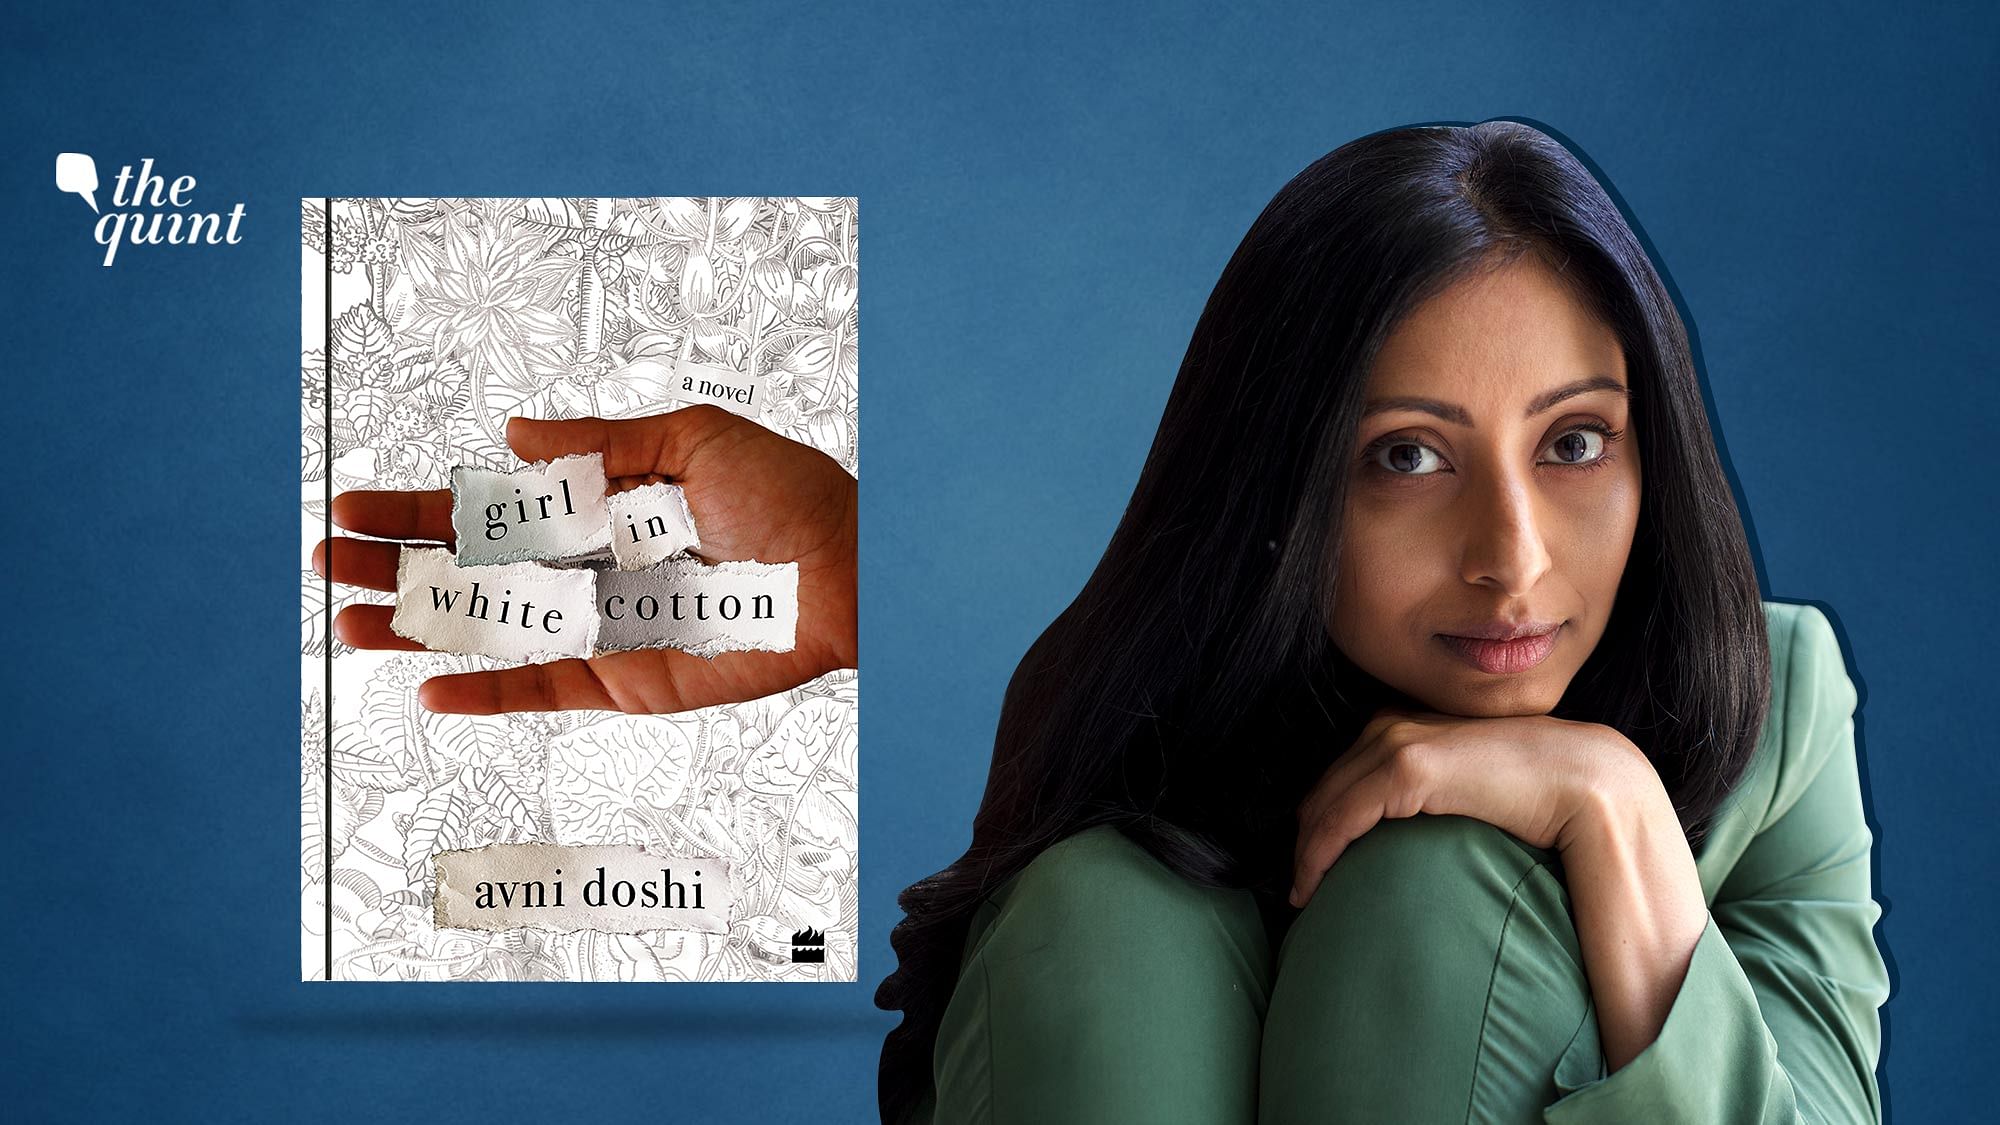 Avni Doshi’s debut ‘Girl in White Cotton’ is the only book by a writer of South Asian origin on Booker Prize 2020 shortlist.&nbsp;